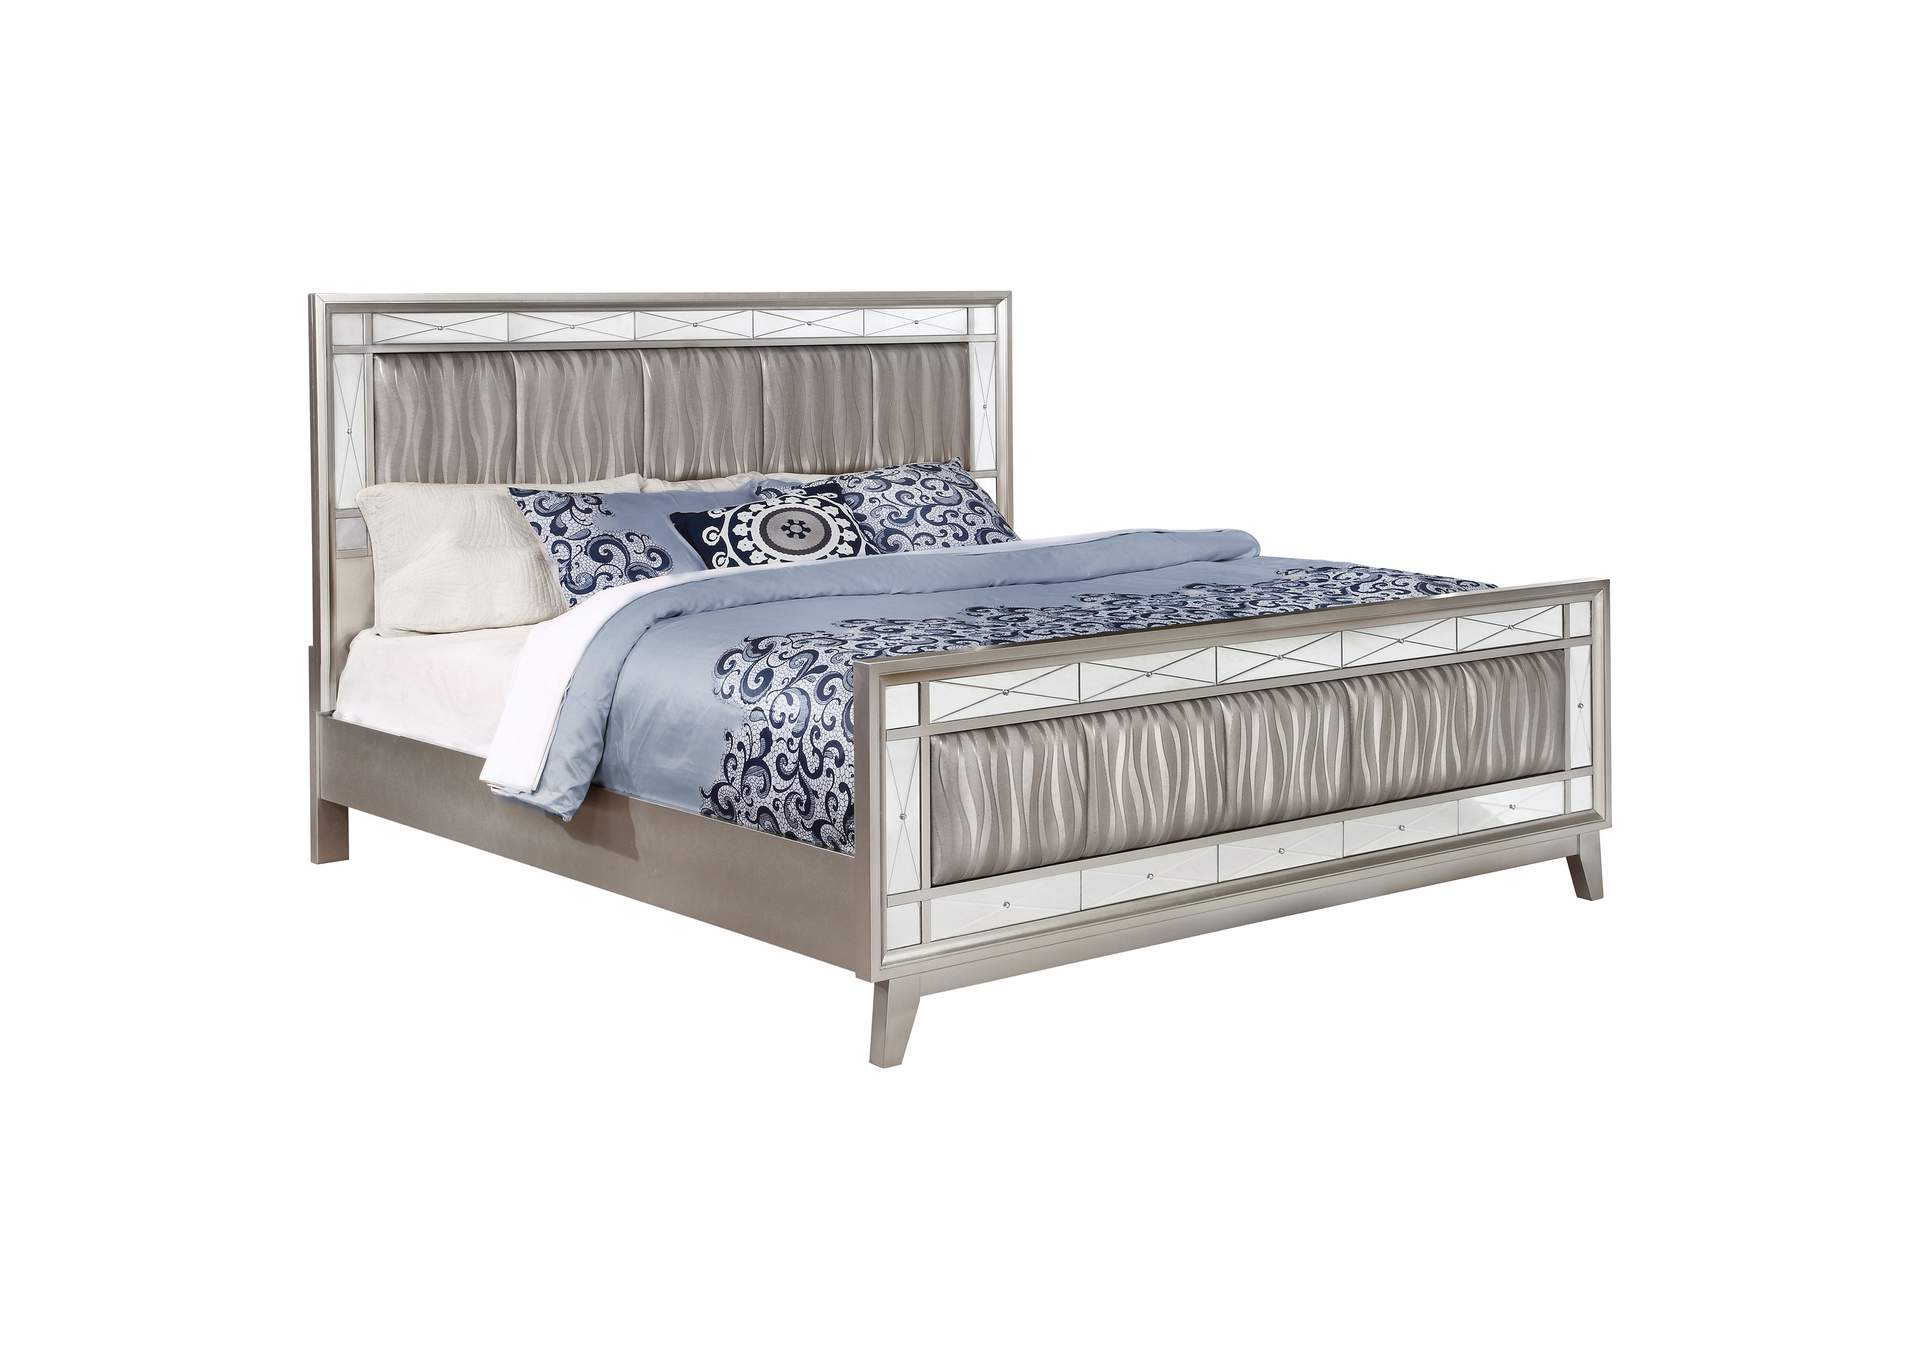 Leighton Full Panel Bed with Mirrored Accents Mercury Metallic,Coaster Furniture